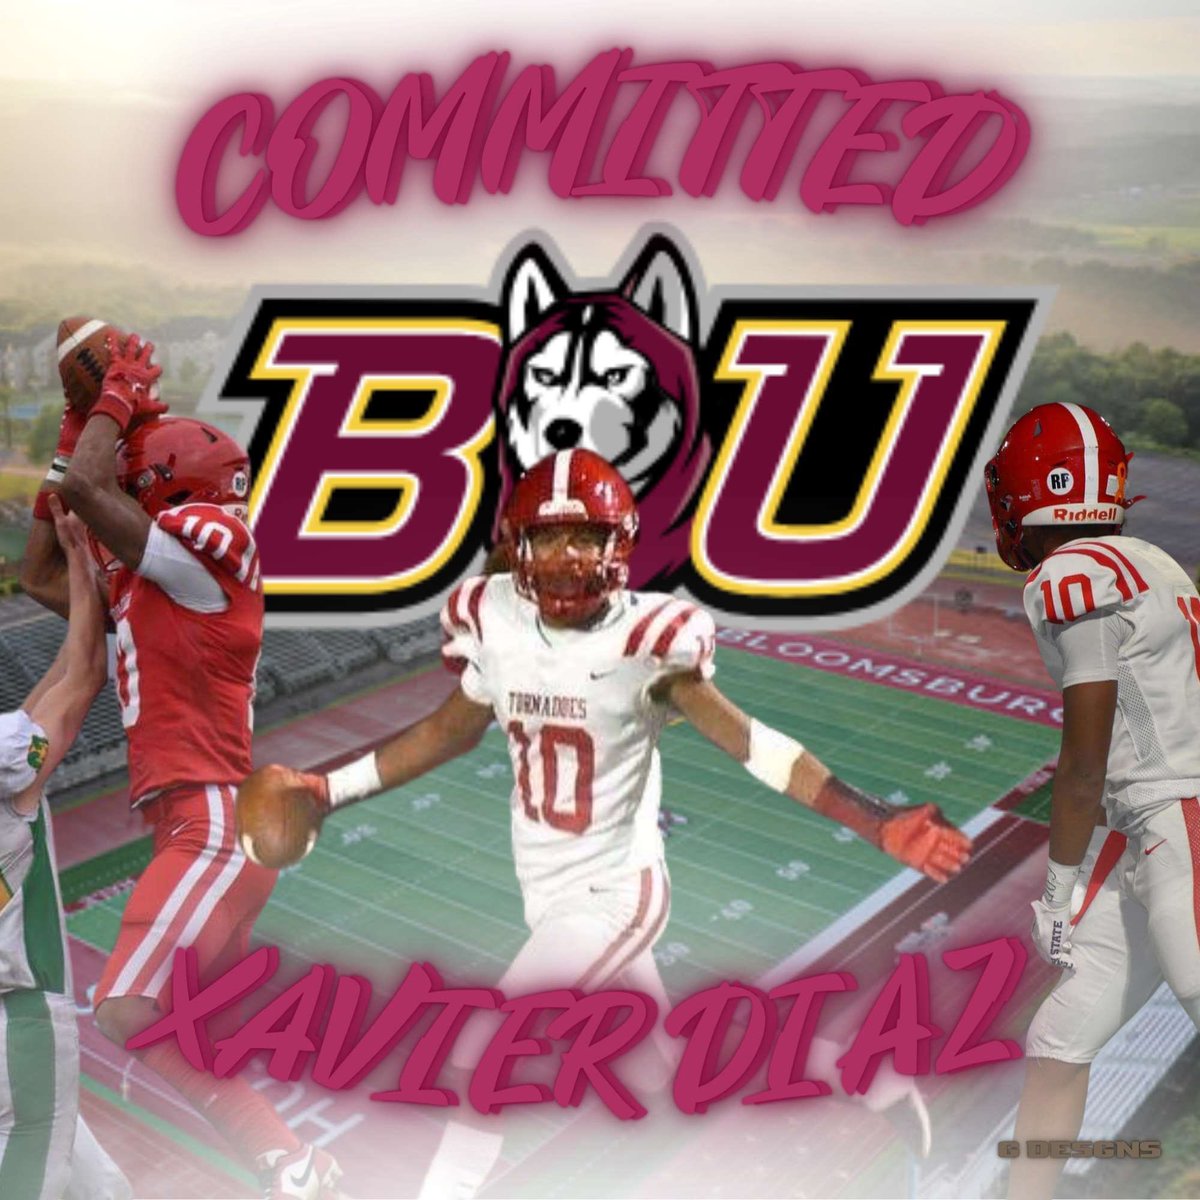 Committed‼️ Let’s Work @BloomUFootball @SheptockFrank @CoachBernocco @GOBIGRED19 @VAPORTRAIL2471